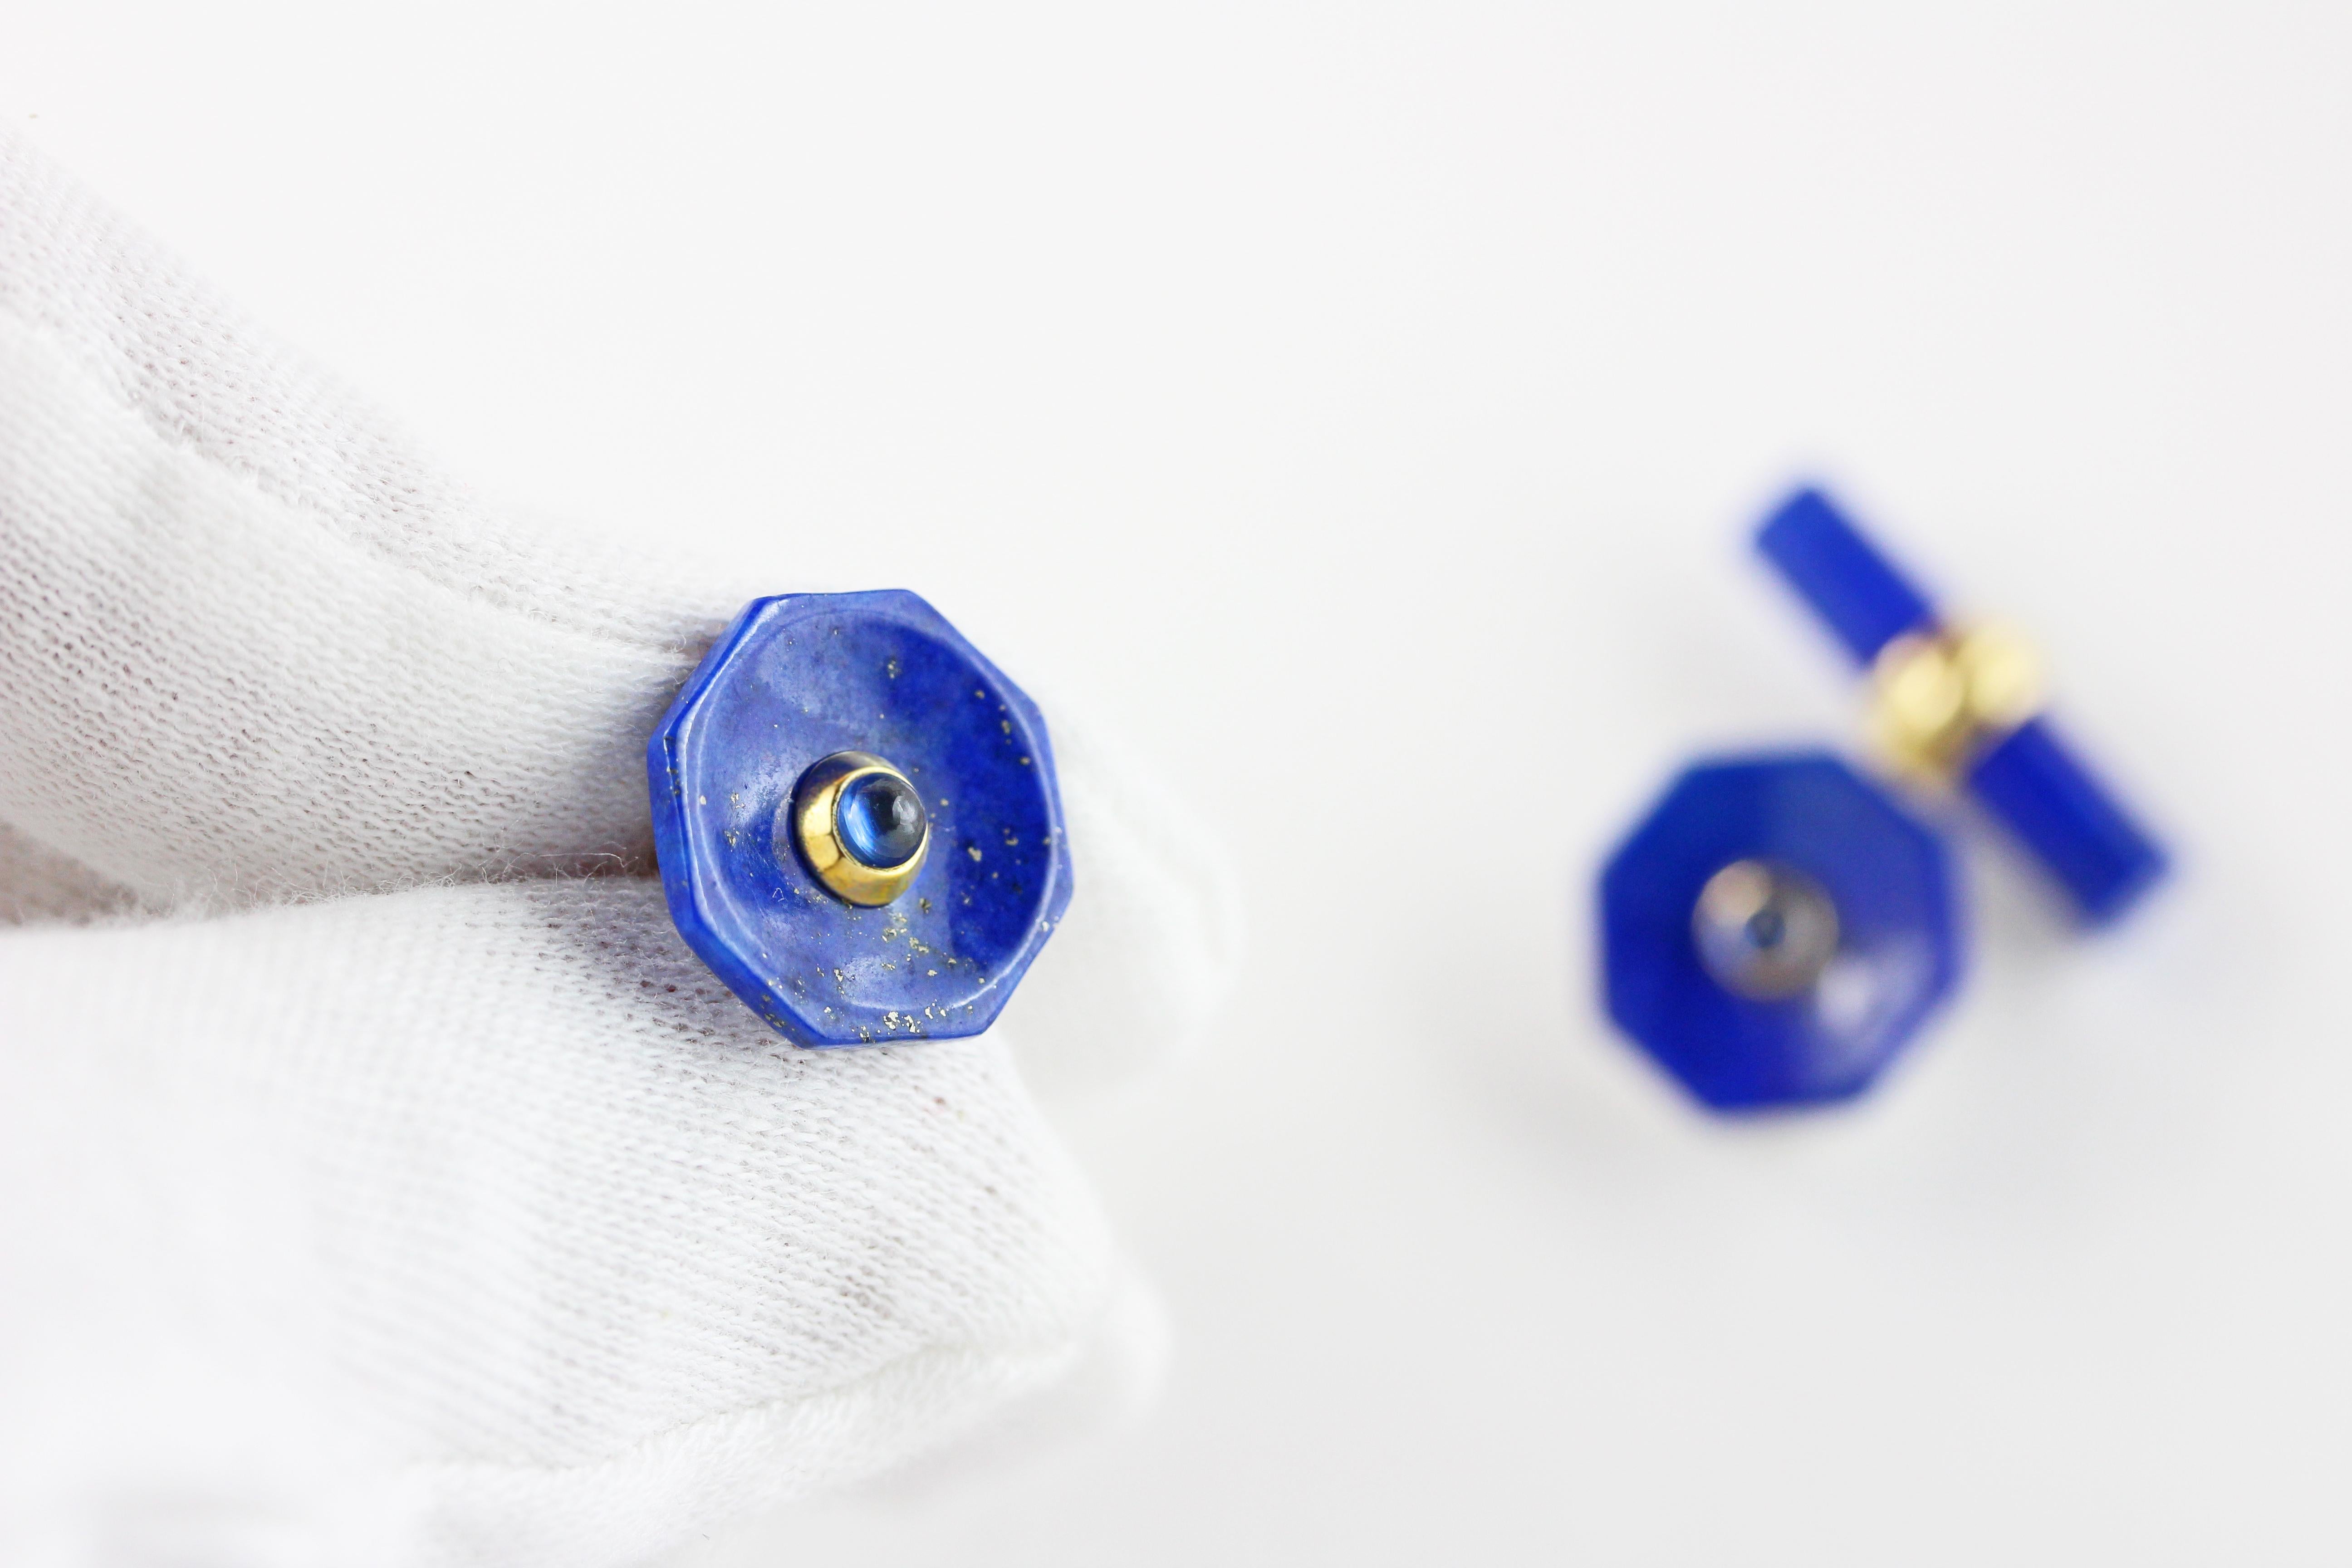 This elegant pair of cufflinks made in lapis lazuli  features a cylindrical toggle and a front face shaped as an octagon with a convex, multifaceted surface and a central ornament made of a sapphire cabochon. 
The post linking front face and toggle